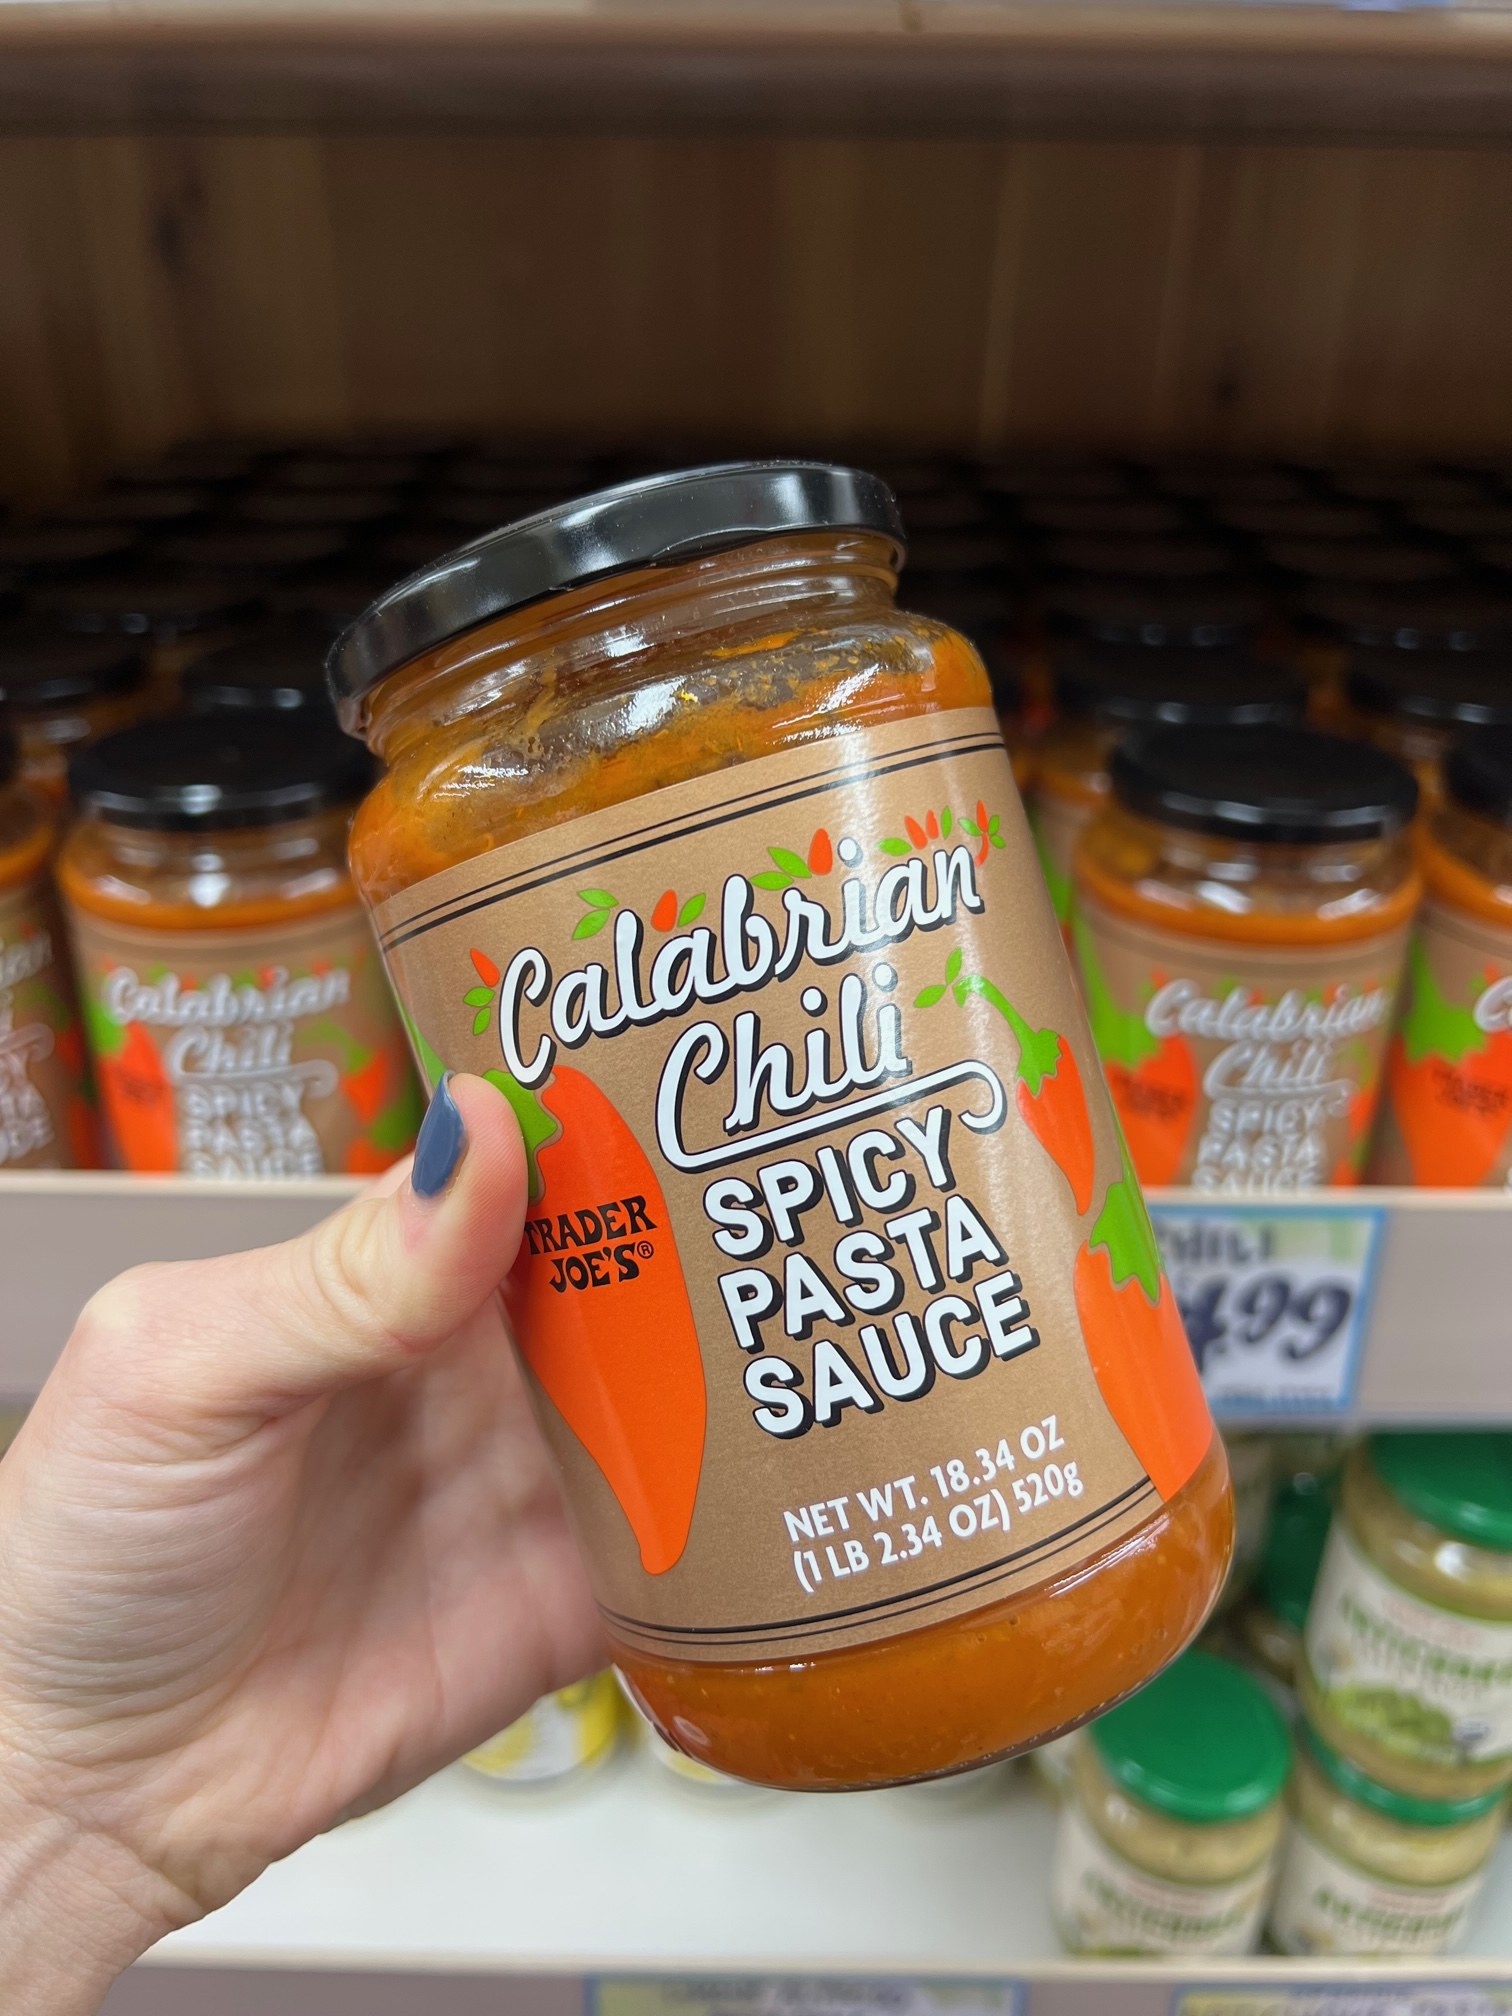 A jar of Calabrian Chili Spicy Pasta Sauce